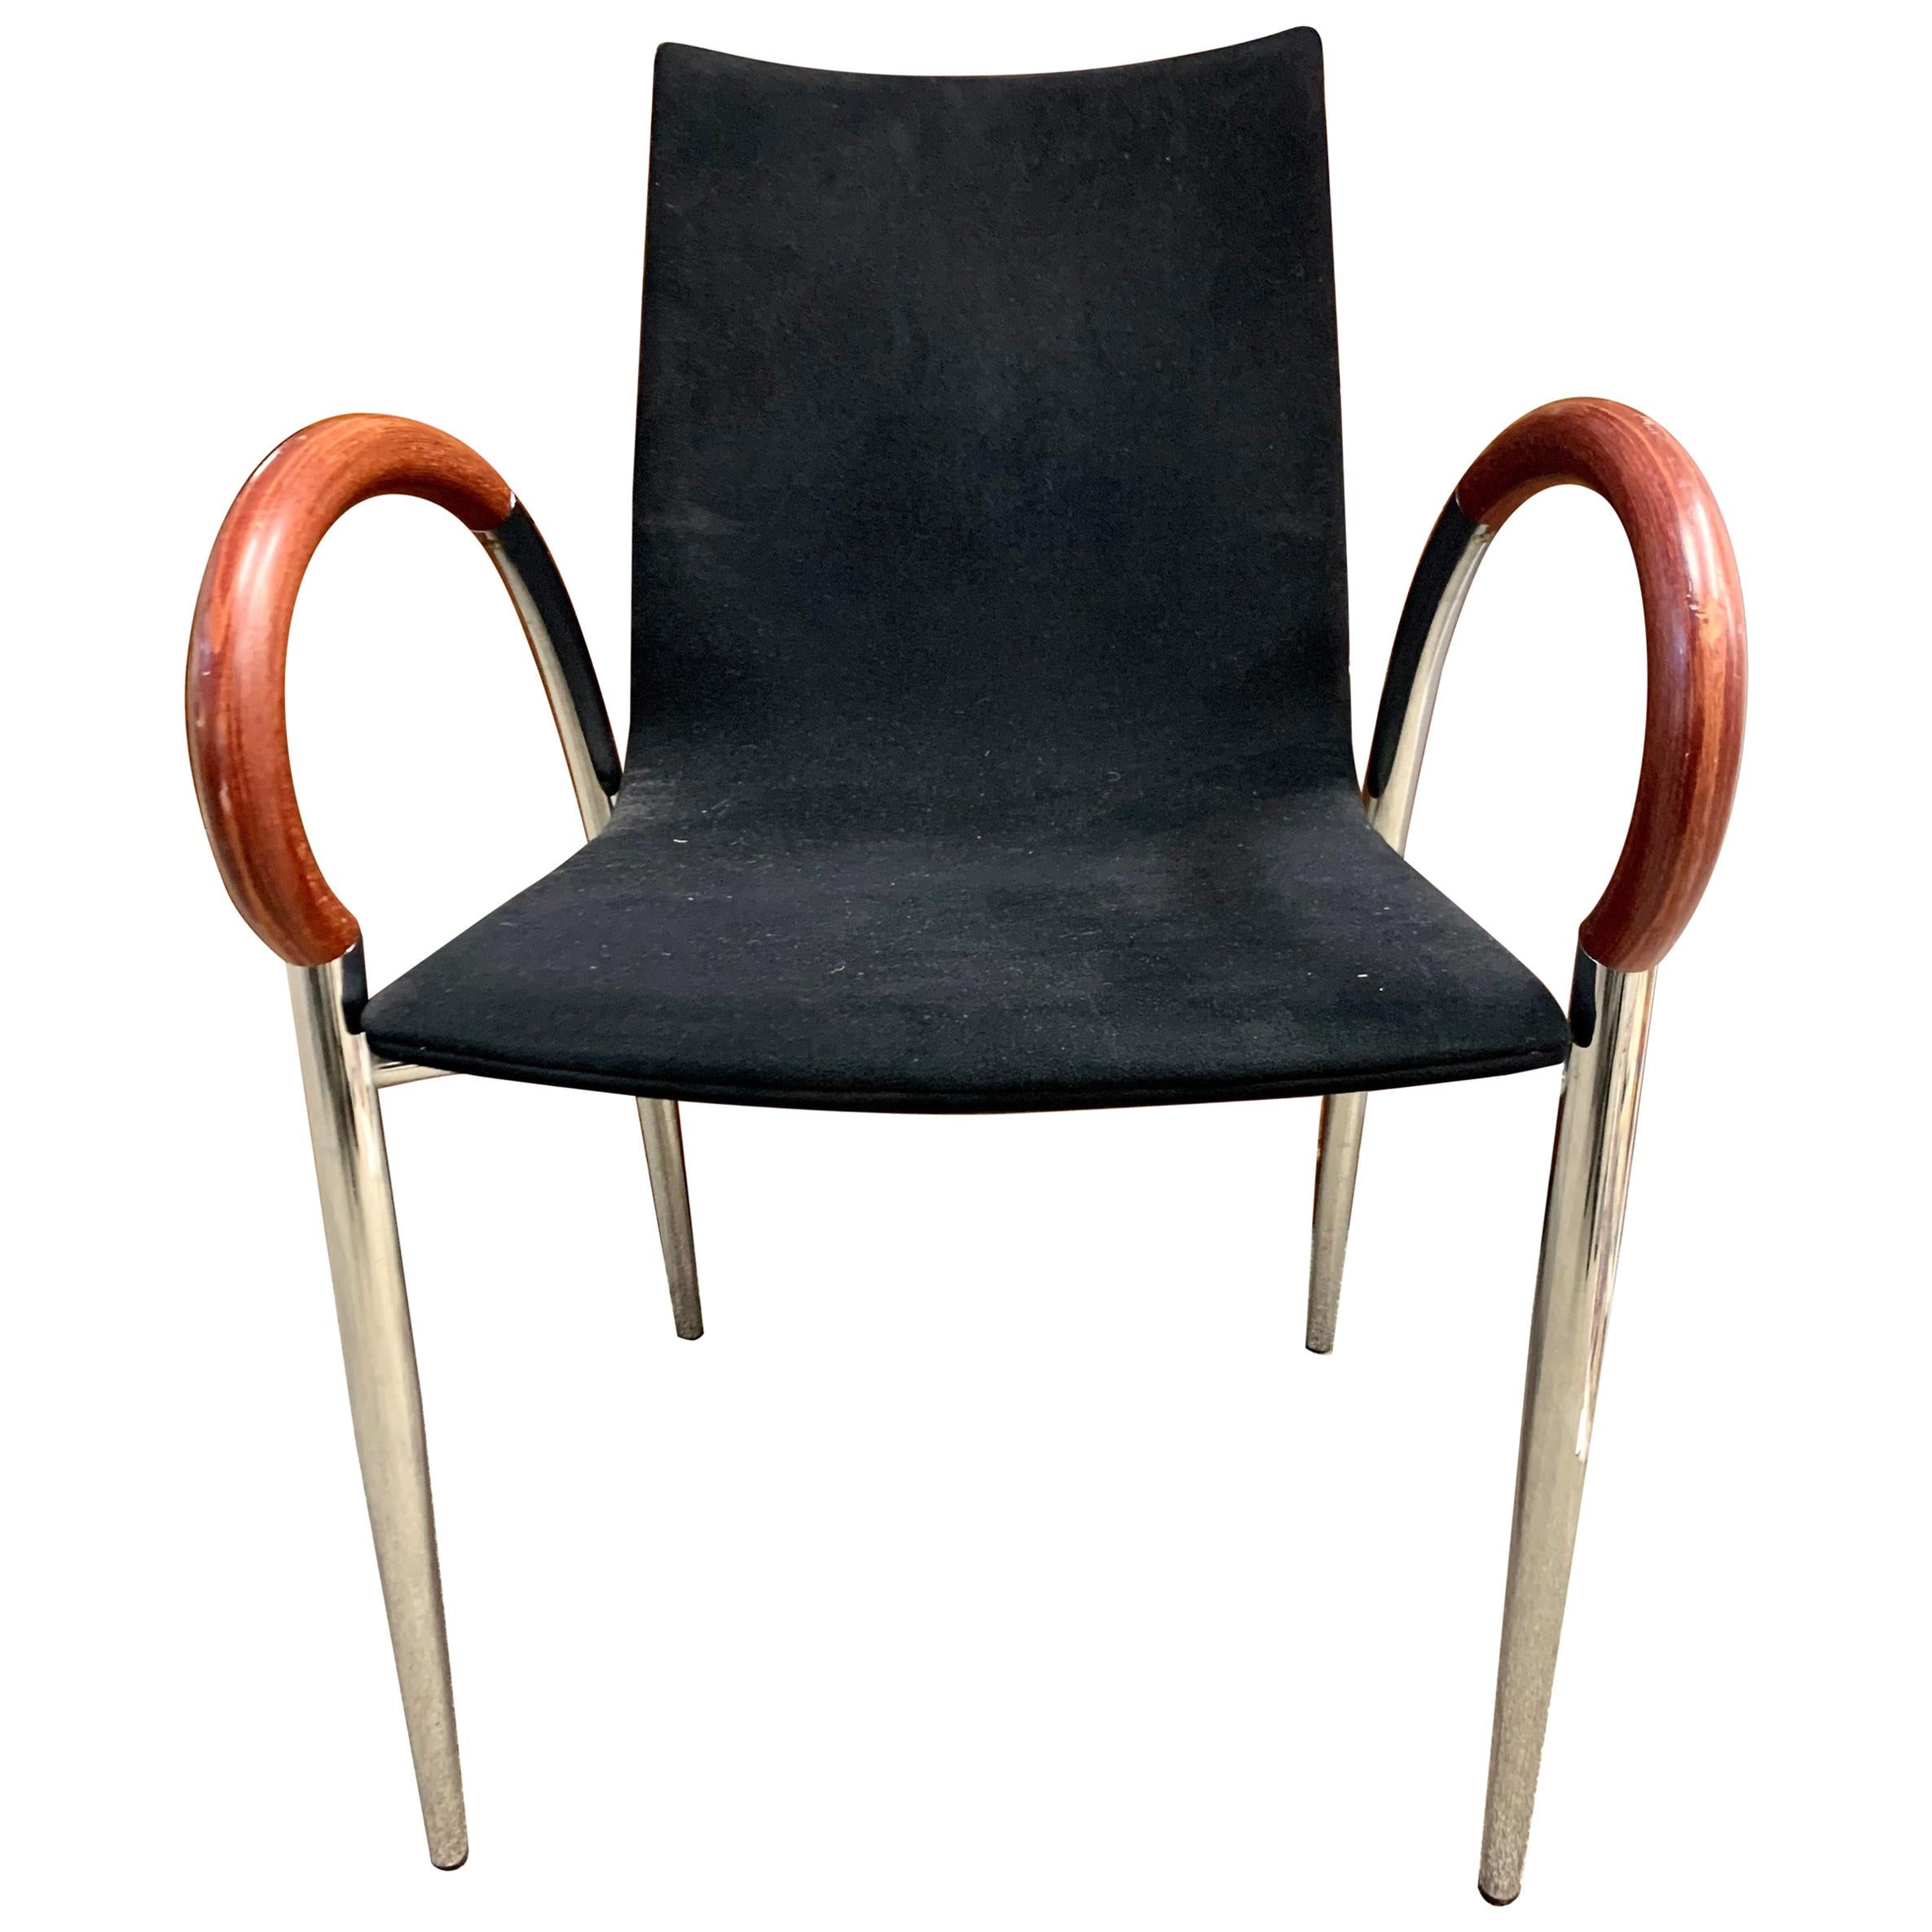 Set of Mid-Century Modern Made in Italy Dining Chairs